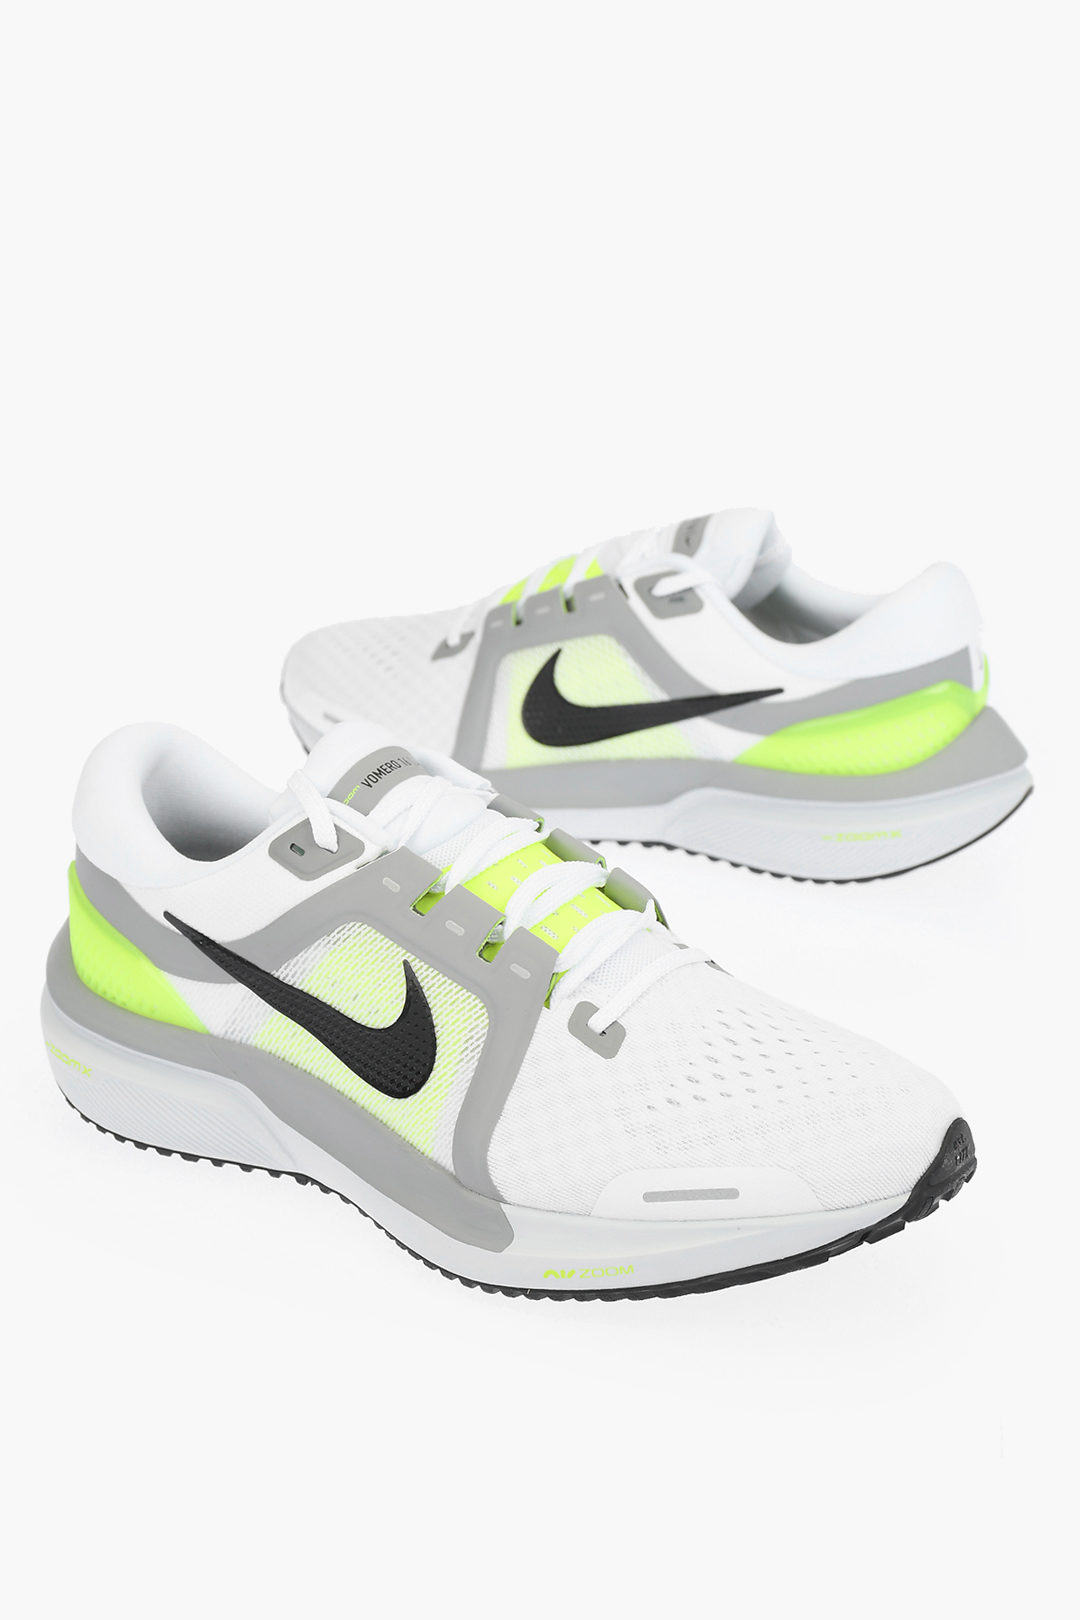 Nike Fabric AIR Sneakers men - Glamood Outlet